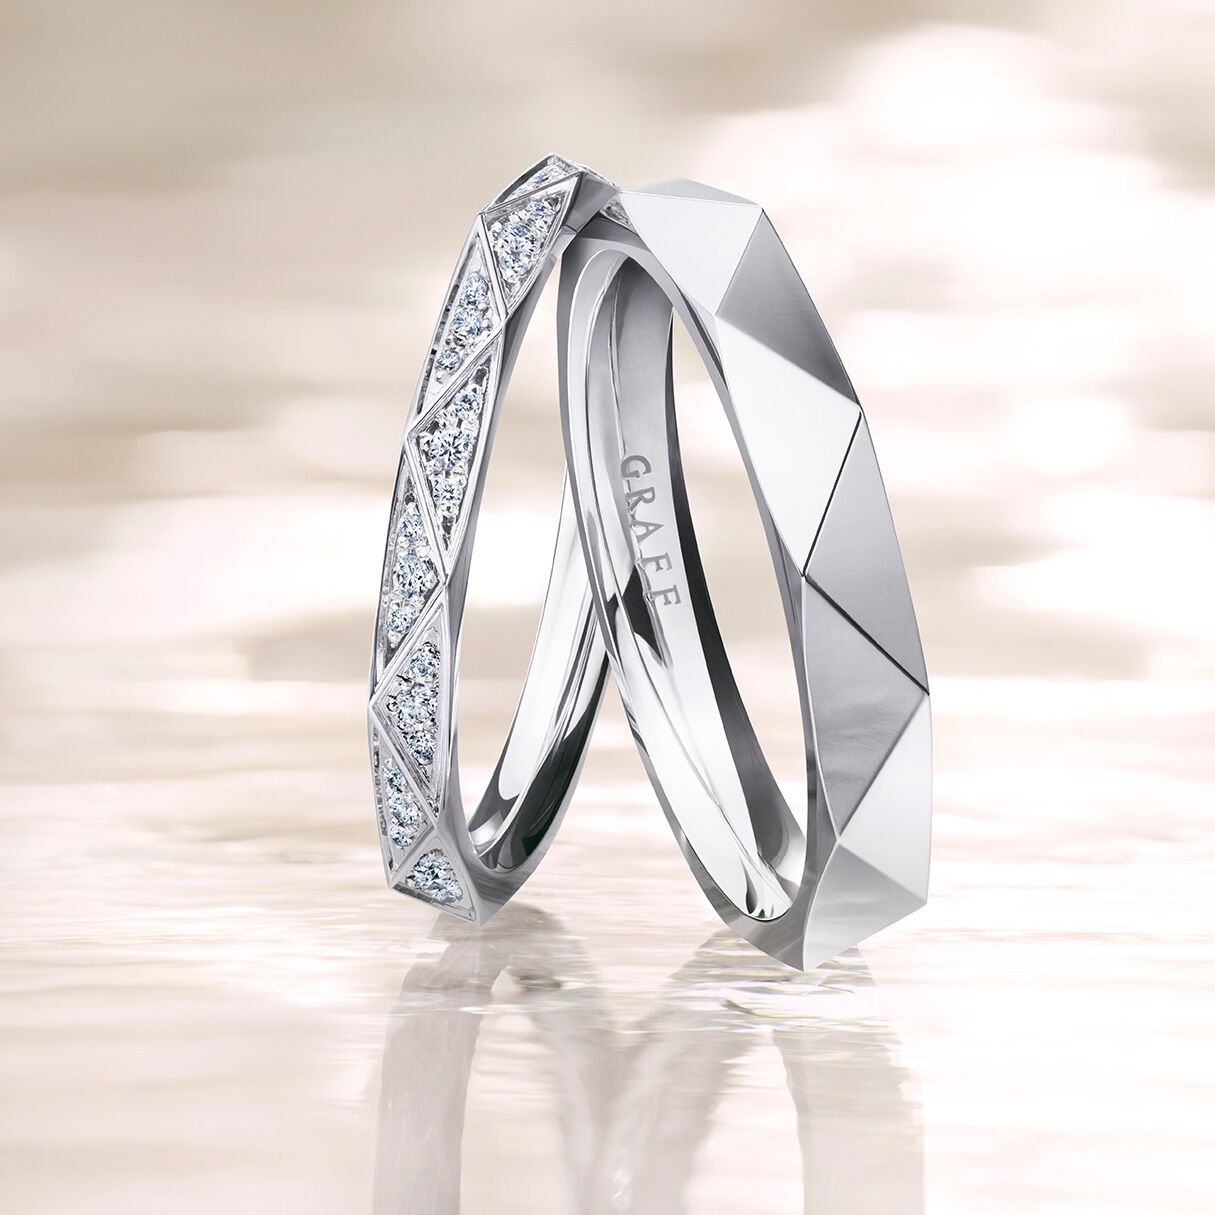 BAND RINGS - FEATURED - JEWELLERY